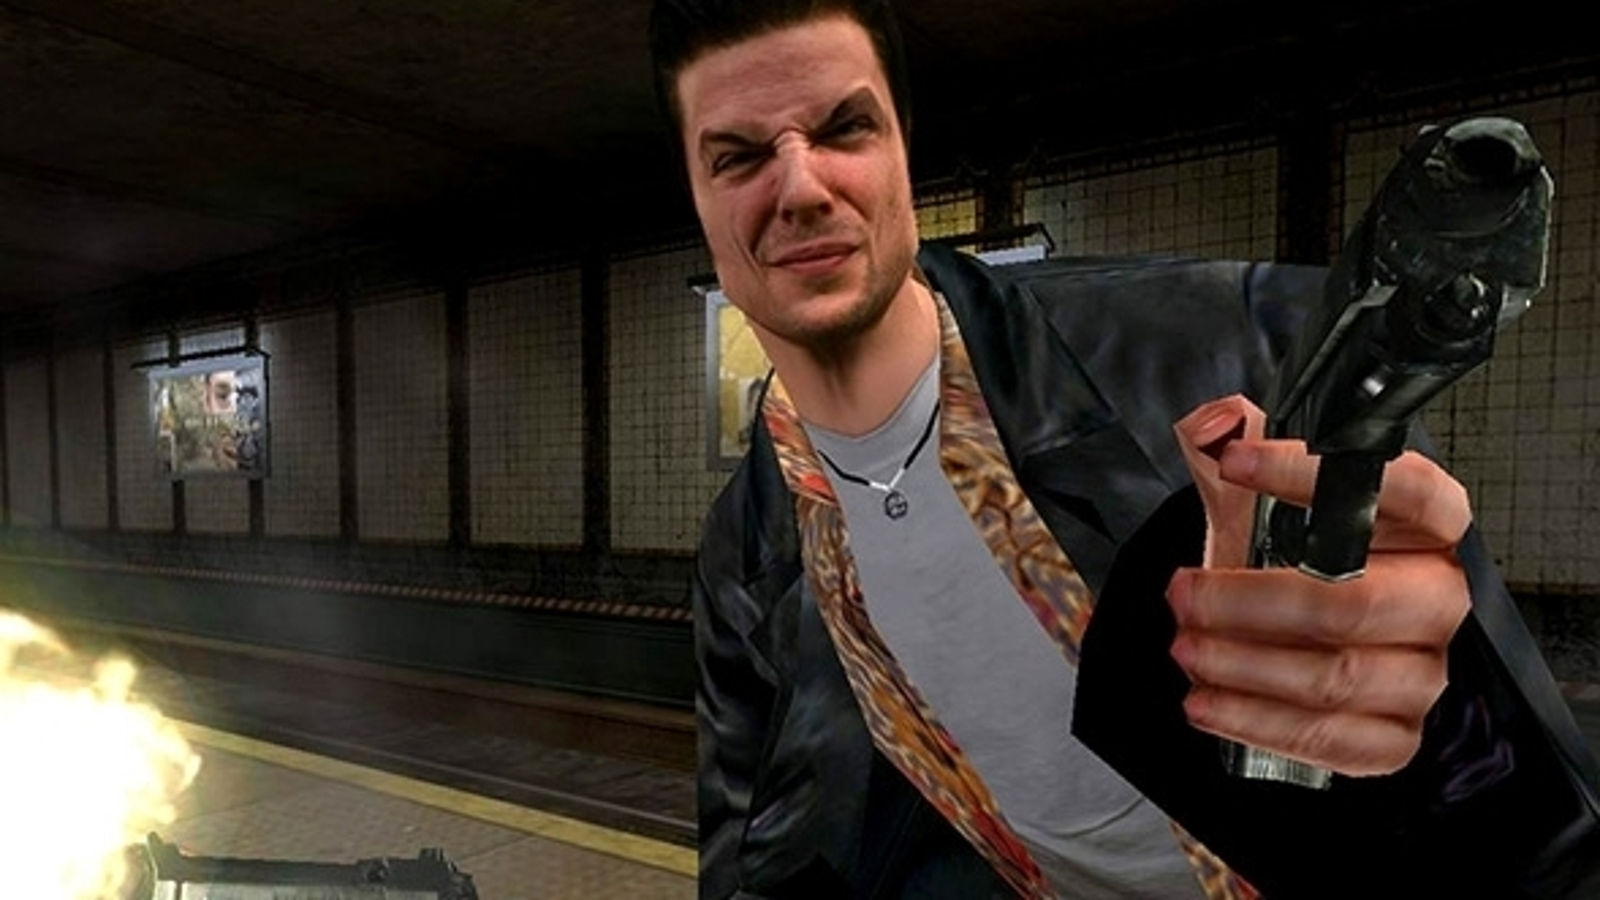 20-years-on-max-payne-is-as-stylish-as-ever-1627733023998.jpg?width=1600&height=900&fit=crop&quality=100&format=png&enable=upscale&auto=webp